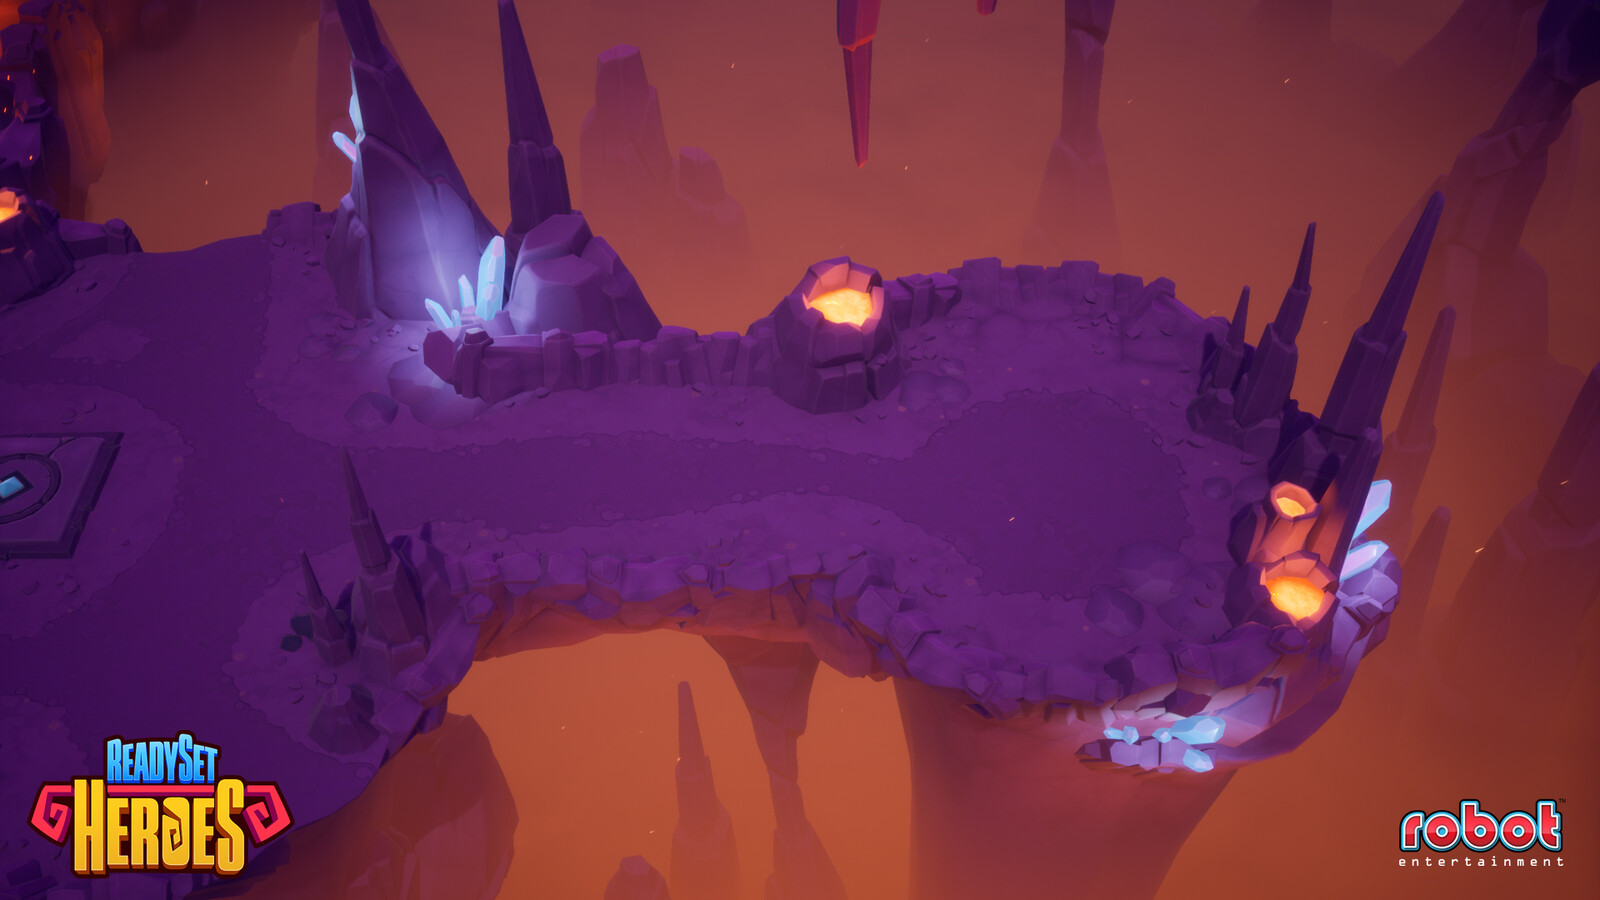 Lava cave art set - Created terrain materials and decals, modeled and textured the crystals, and built out levels.